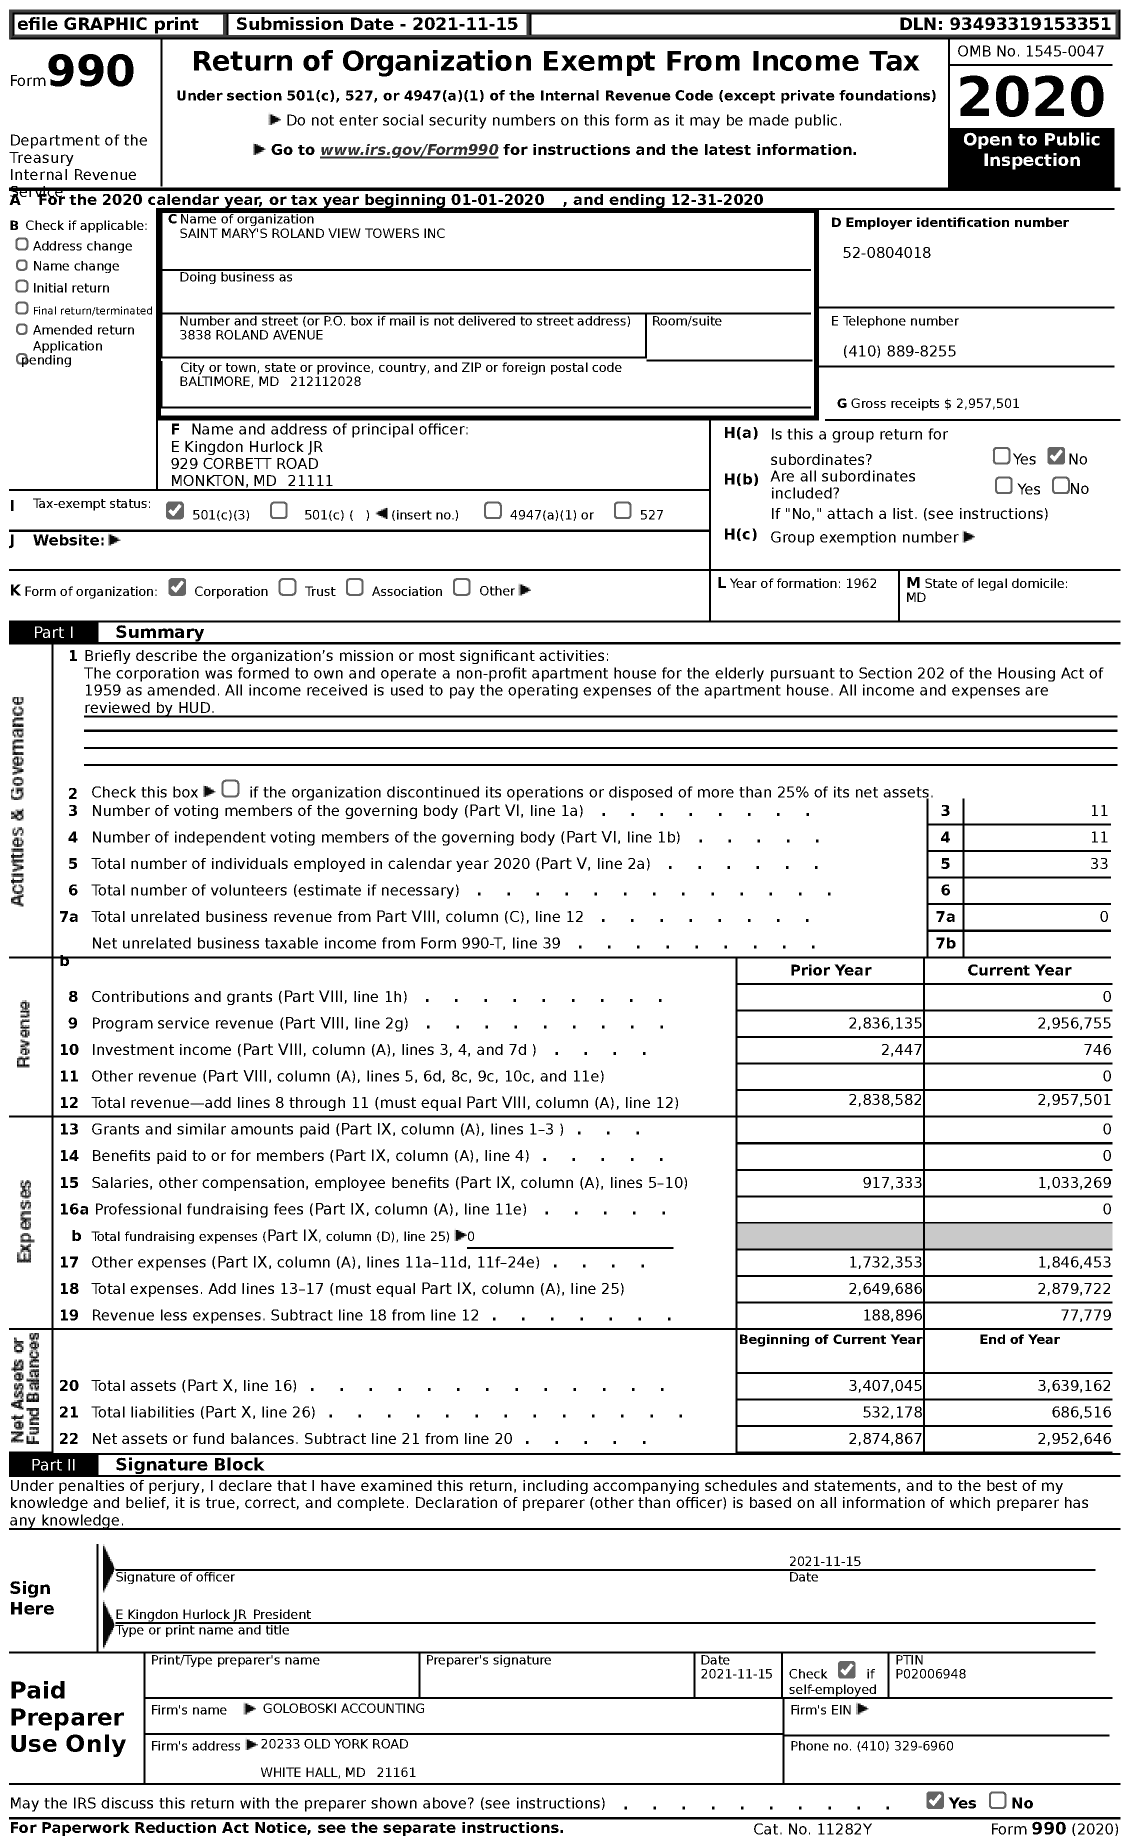 Image of first page of 2020 Form 990 for Saint Mary's Roland View Towers